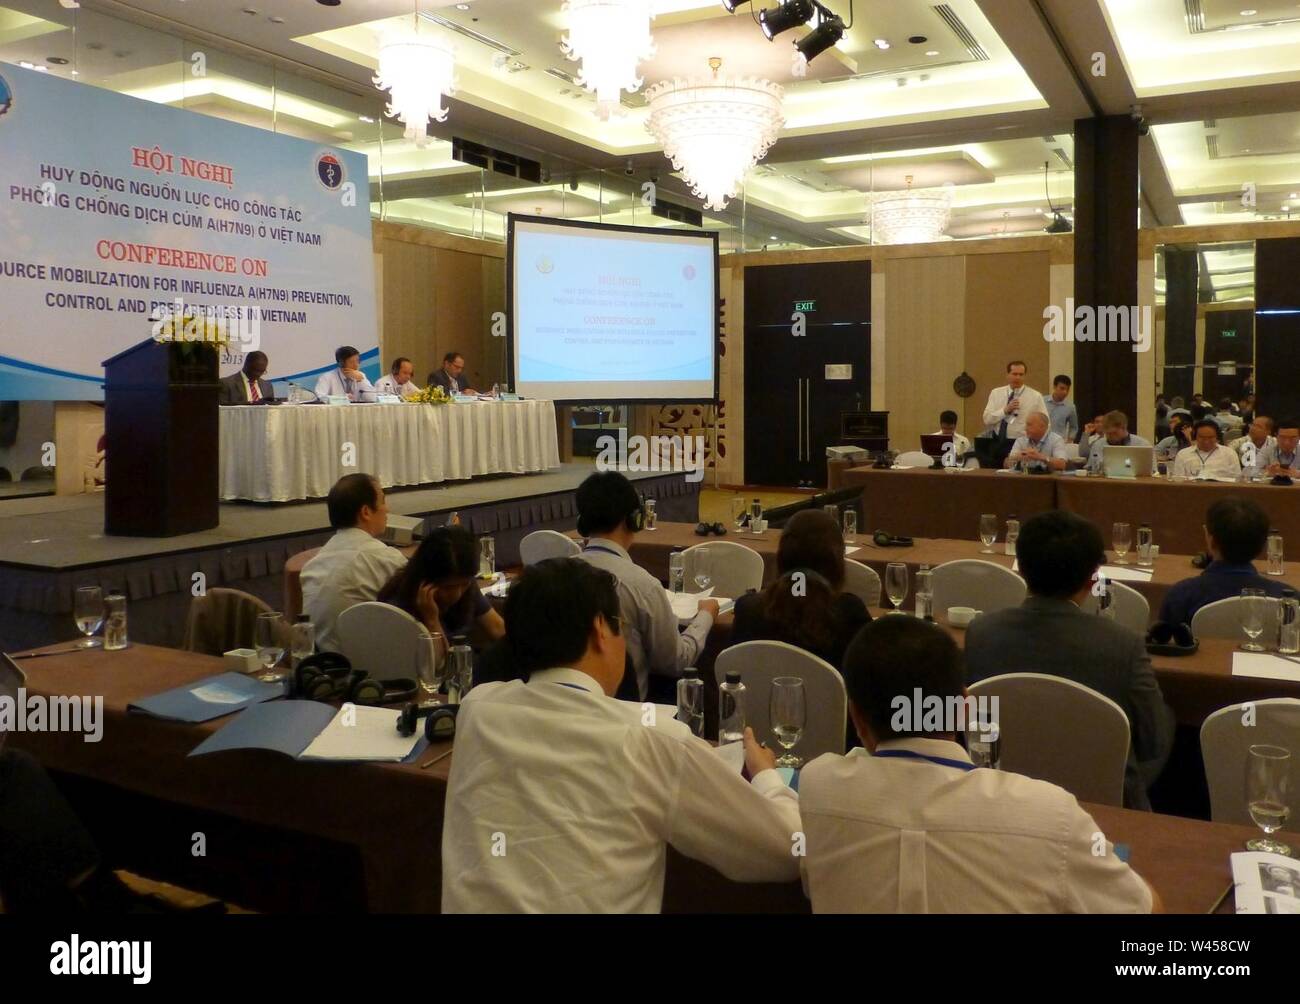 Conference on Resource Mobilization for Influenza A (H7N9) Prevention, Control and Preparedness in Vietnam (8712377459). Stock Photo